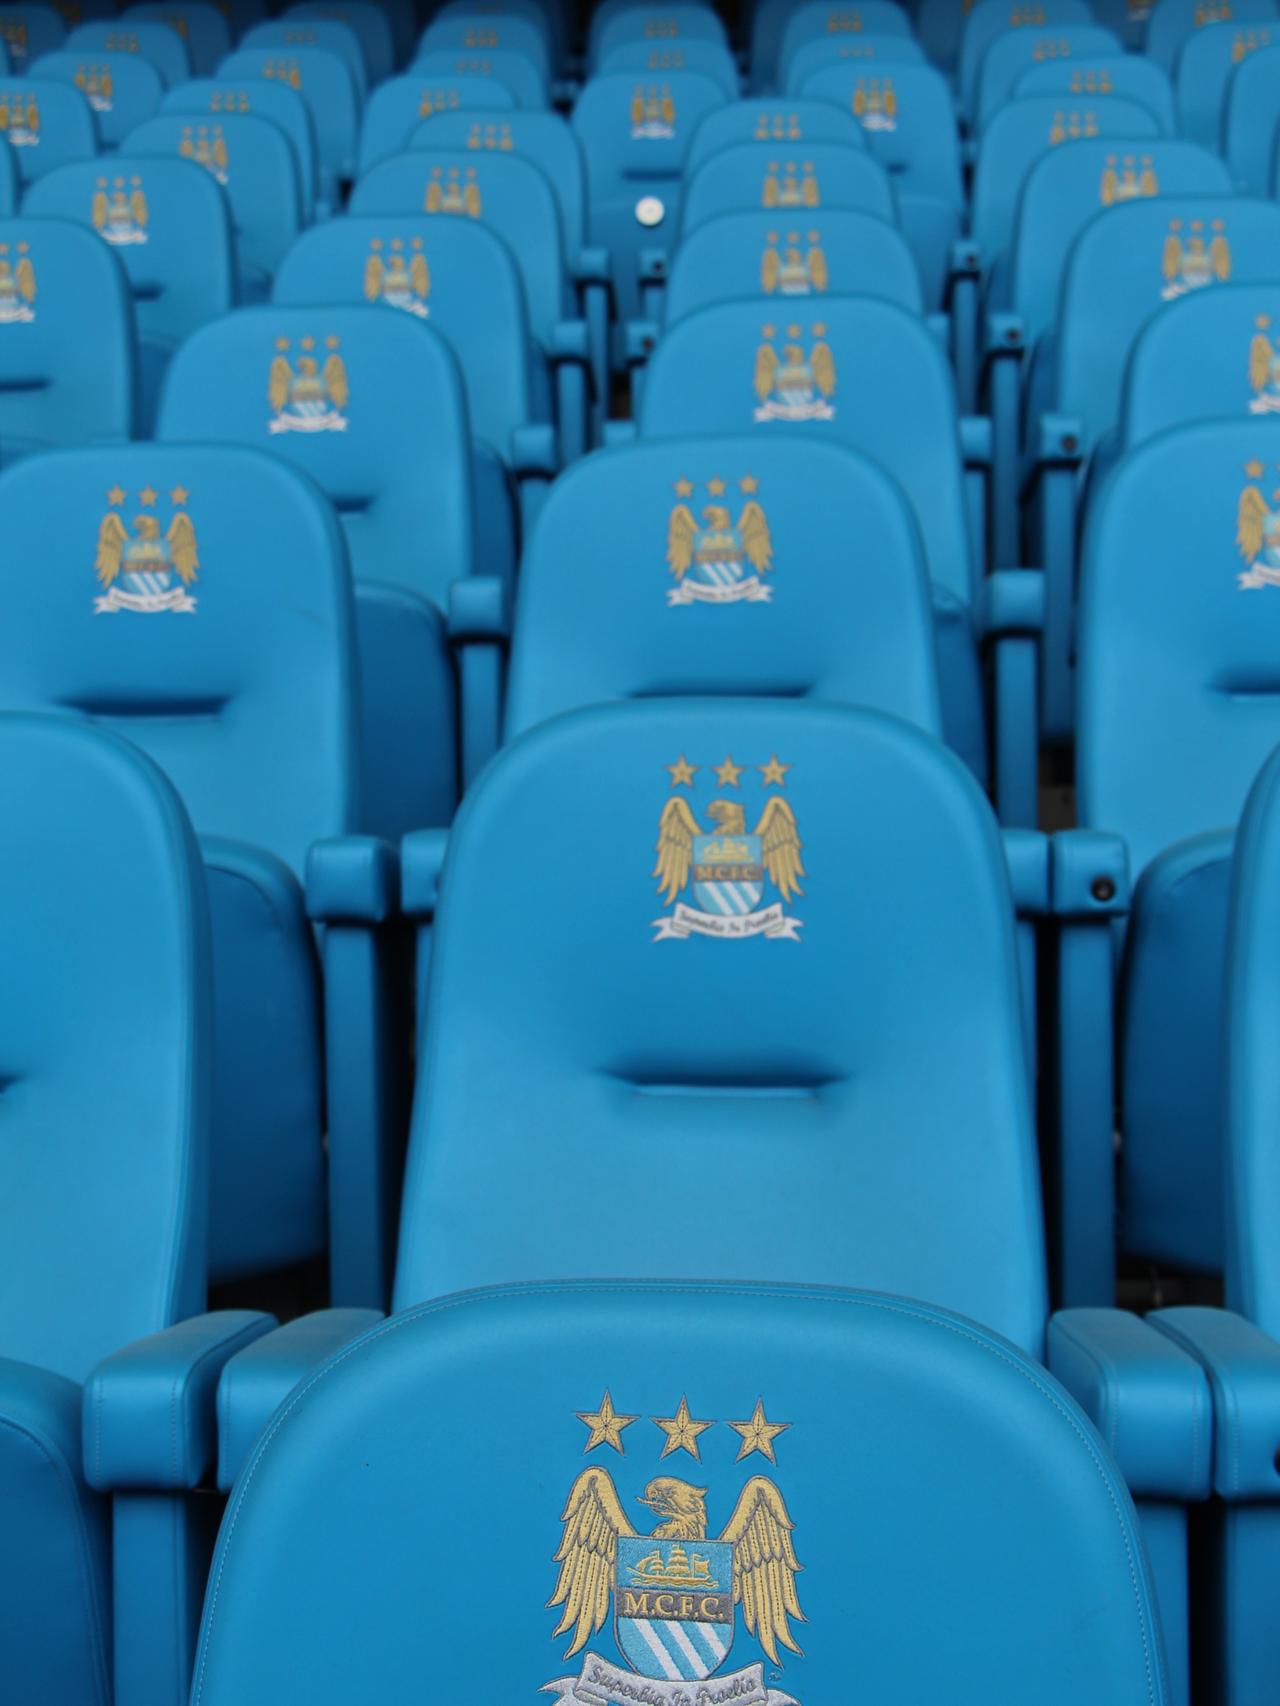 Supplied Travel Manchester, England. VIP seats in the grandstand at Manchester City's home ground. Pic Sarah Nich